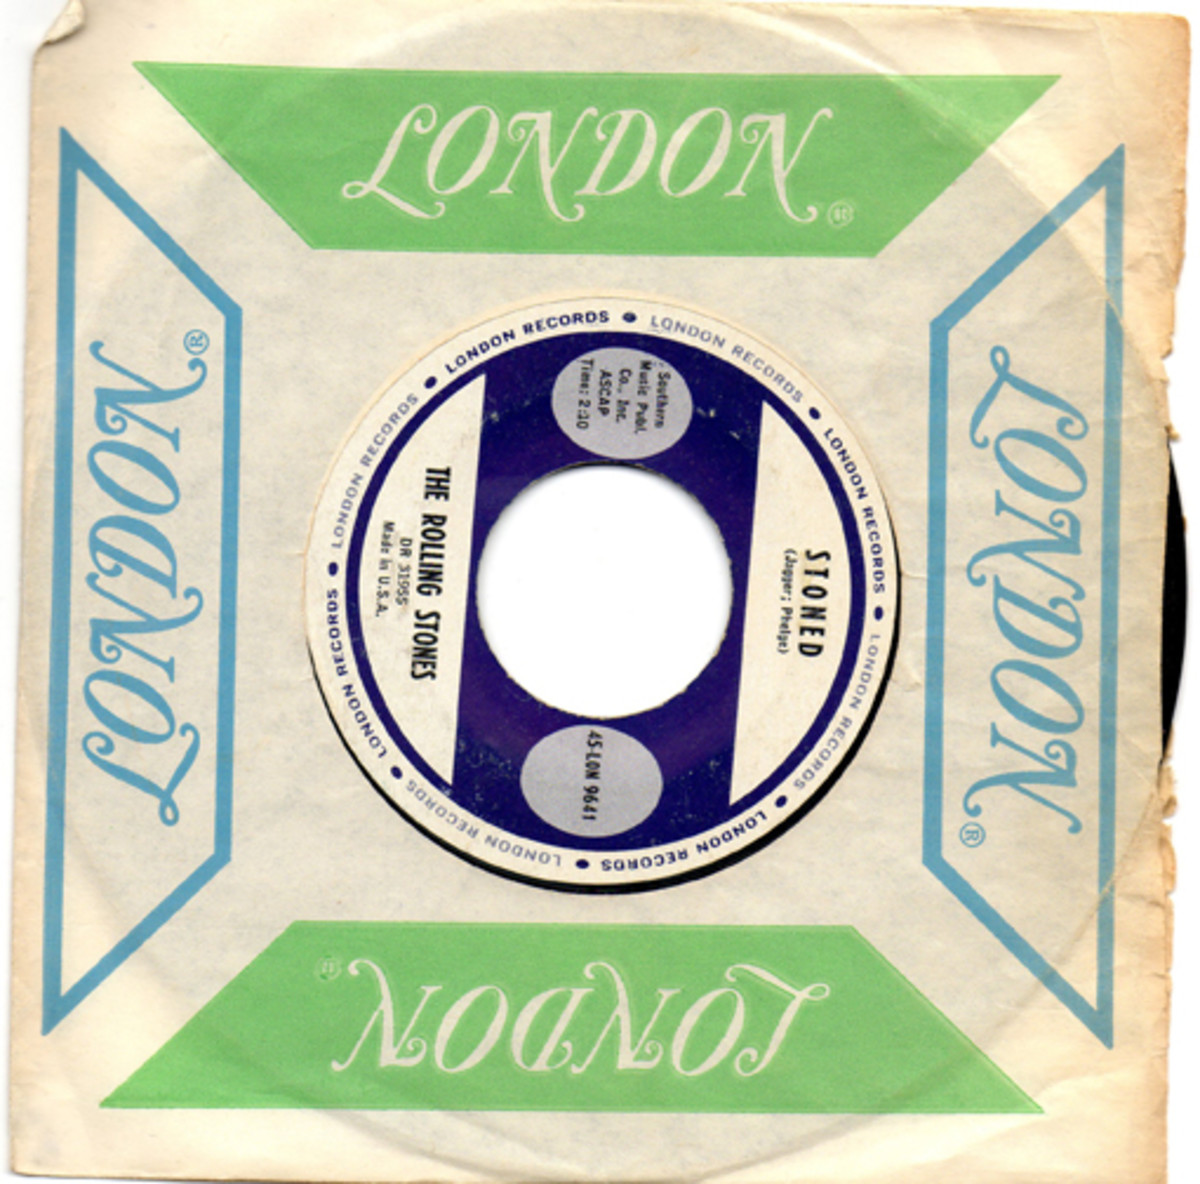 THIS STOCK COPY of The Rolling Stones’ “Stoned” is the jewel —in value, at least — of Richard Kaplan’s collection of 45s on the London label. Photo courtesy of Richard Kaplan